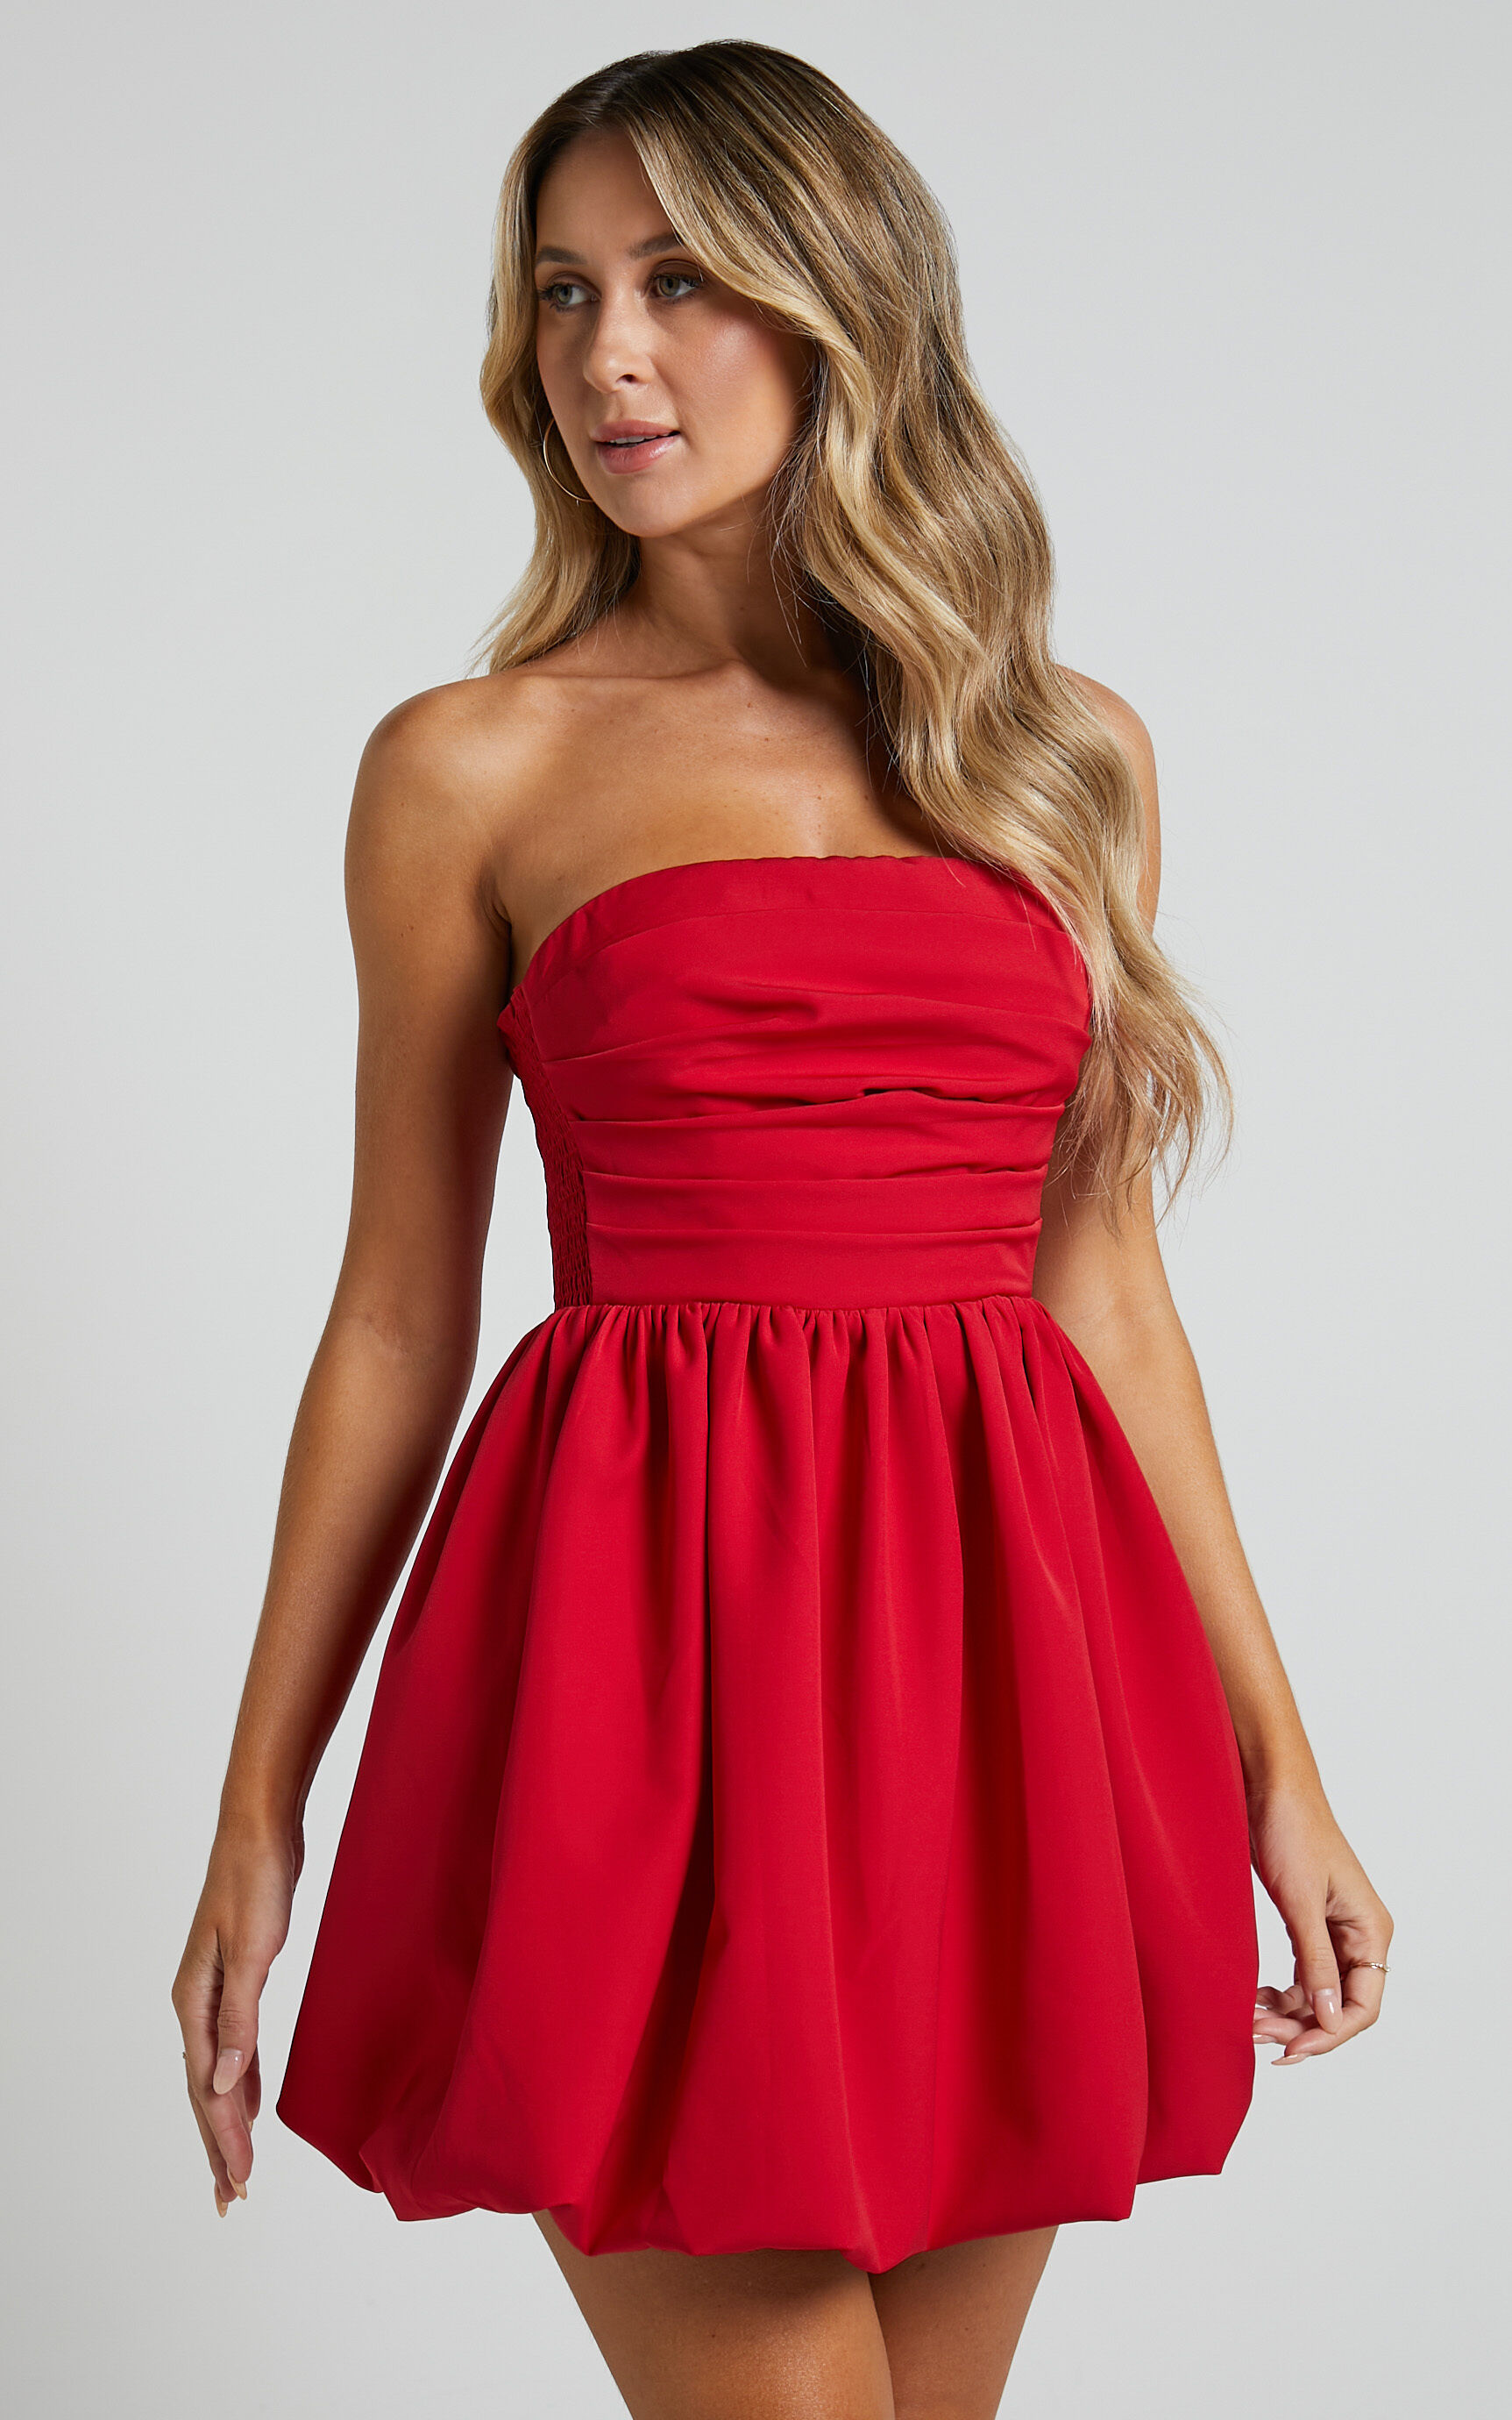 Shaima Strapless Mini Dress in Red - 04, RED1, super-hi-res image number null